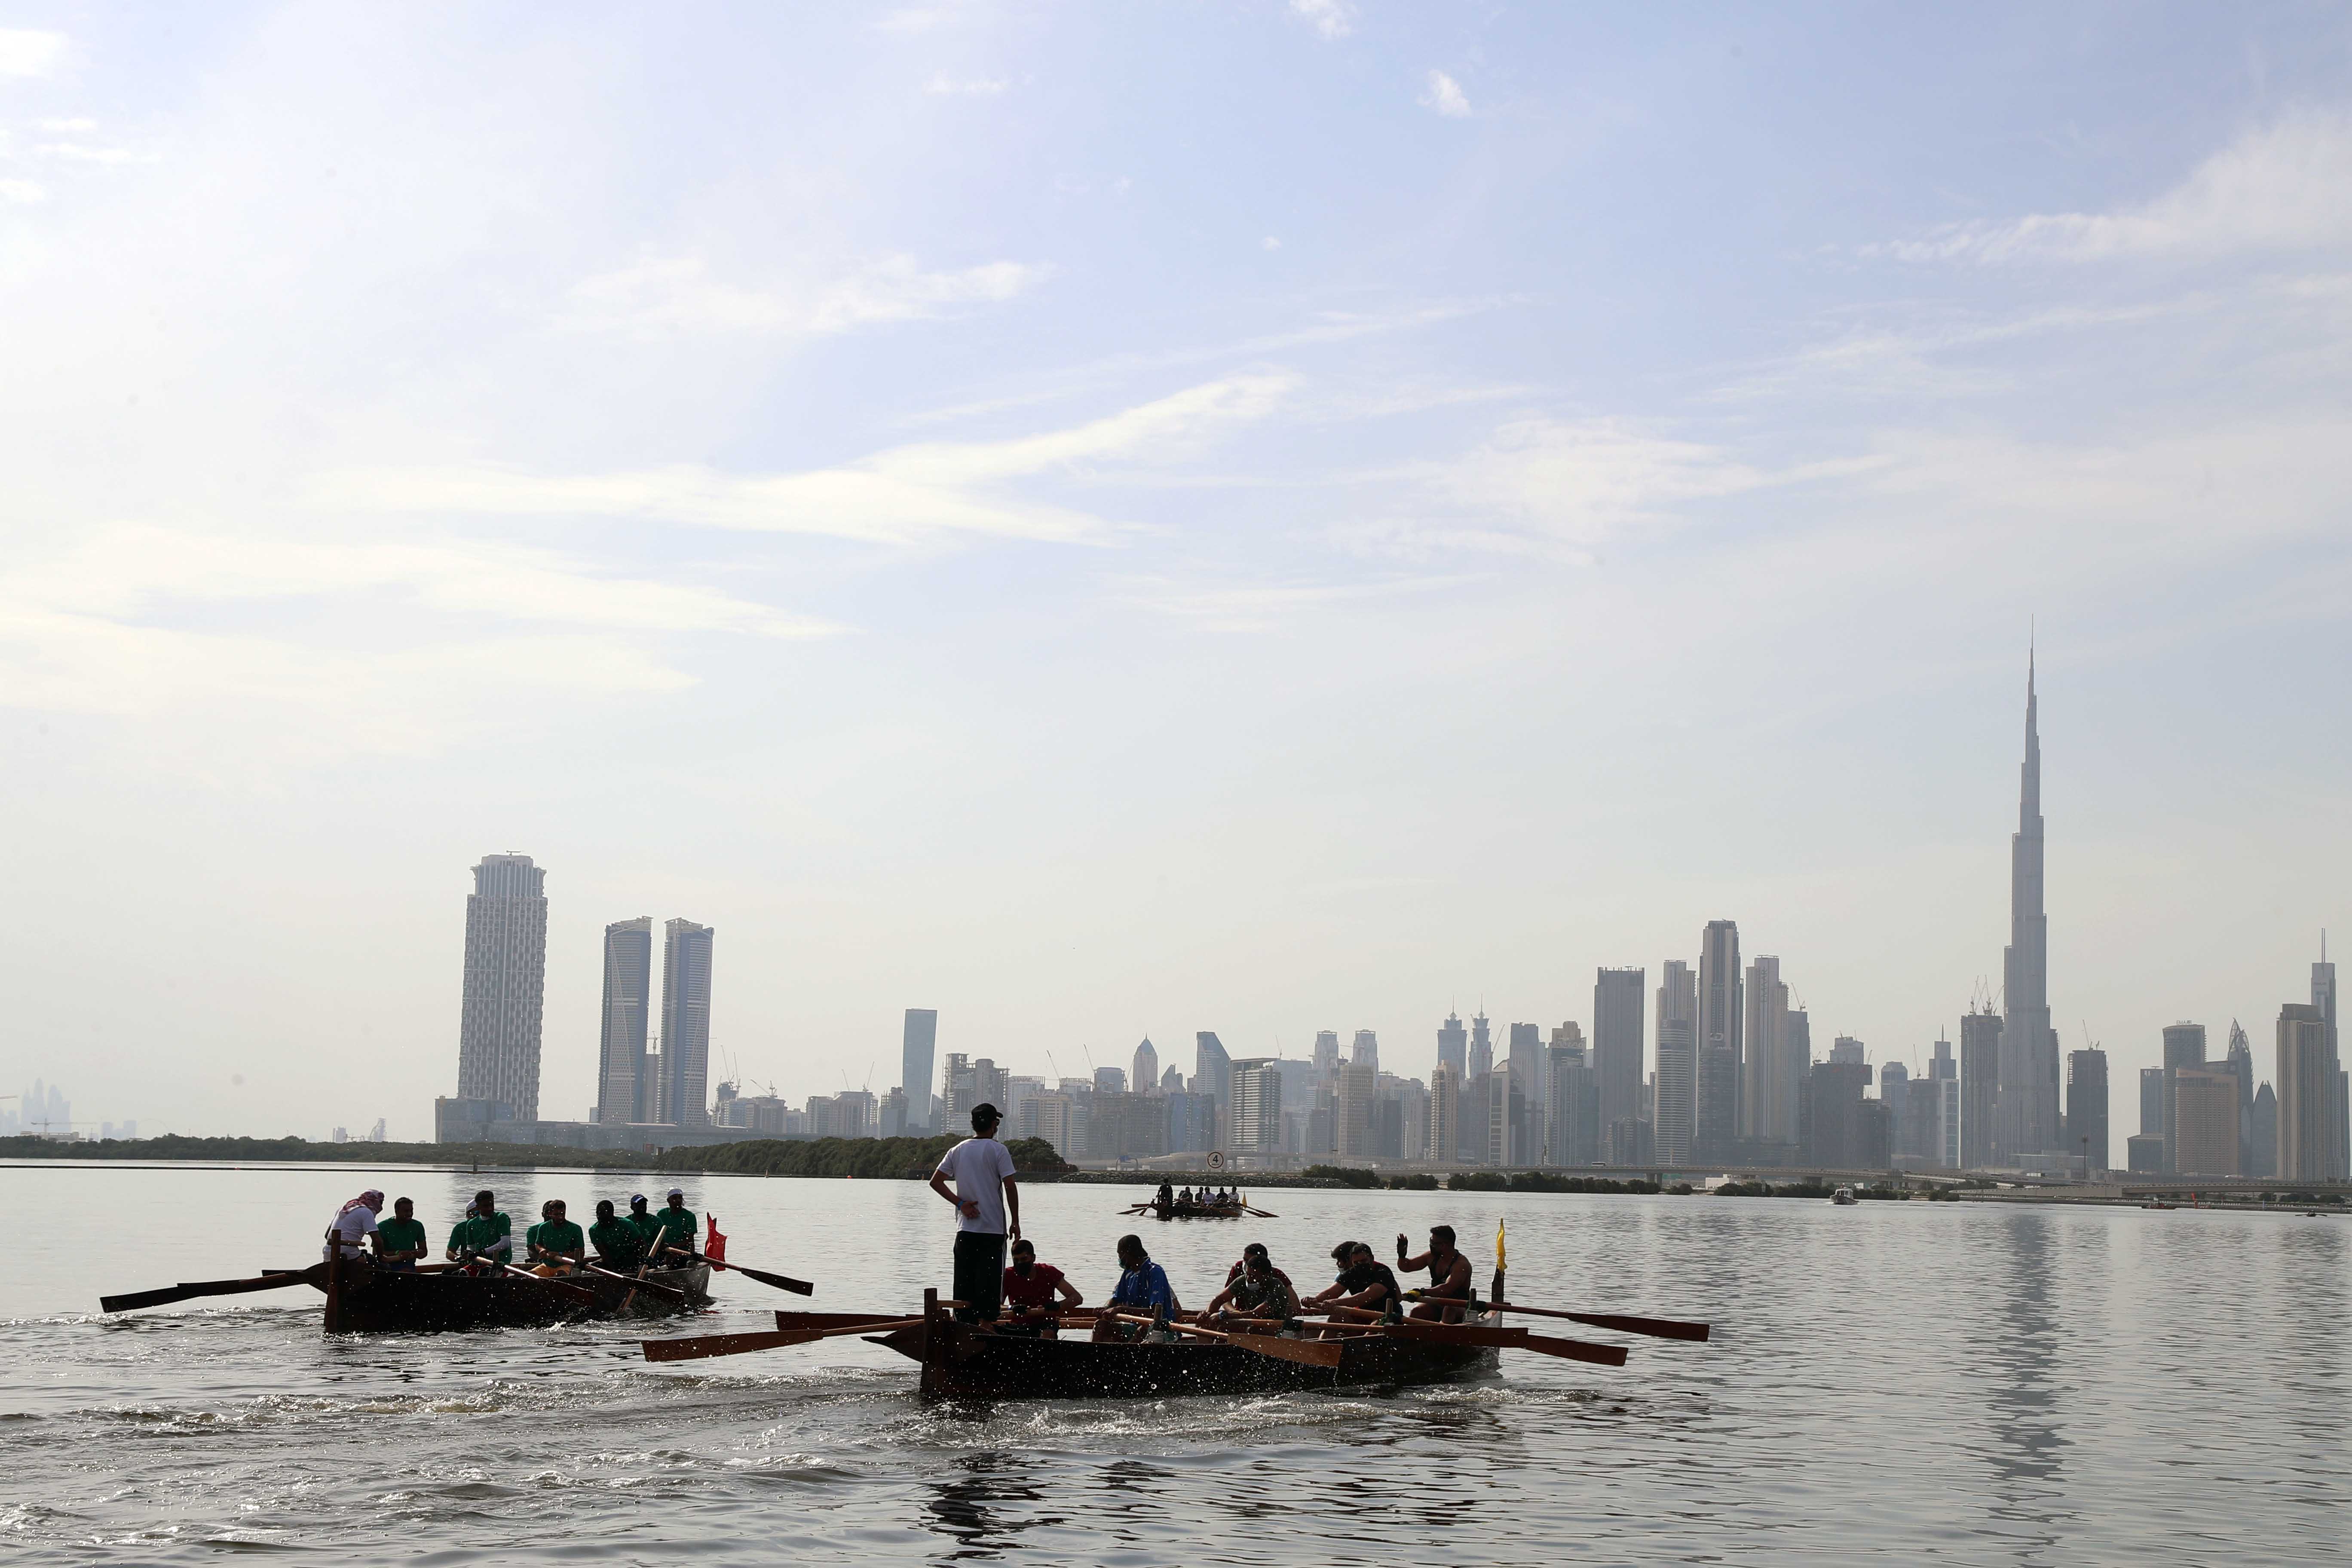 Second Round of Dubai Traditional Rowing Race Today